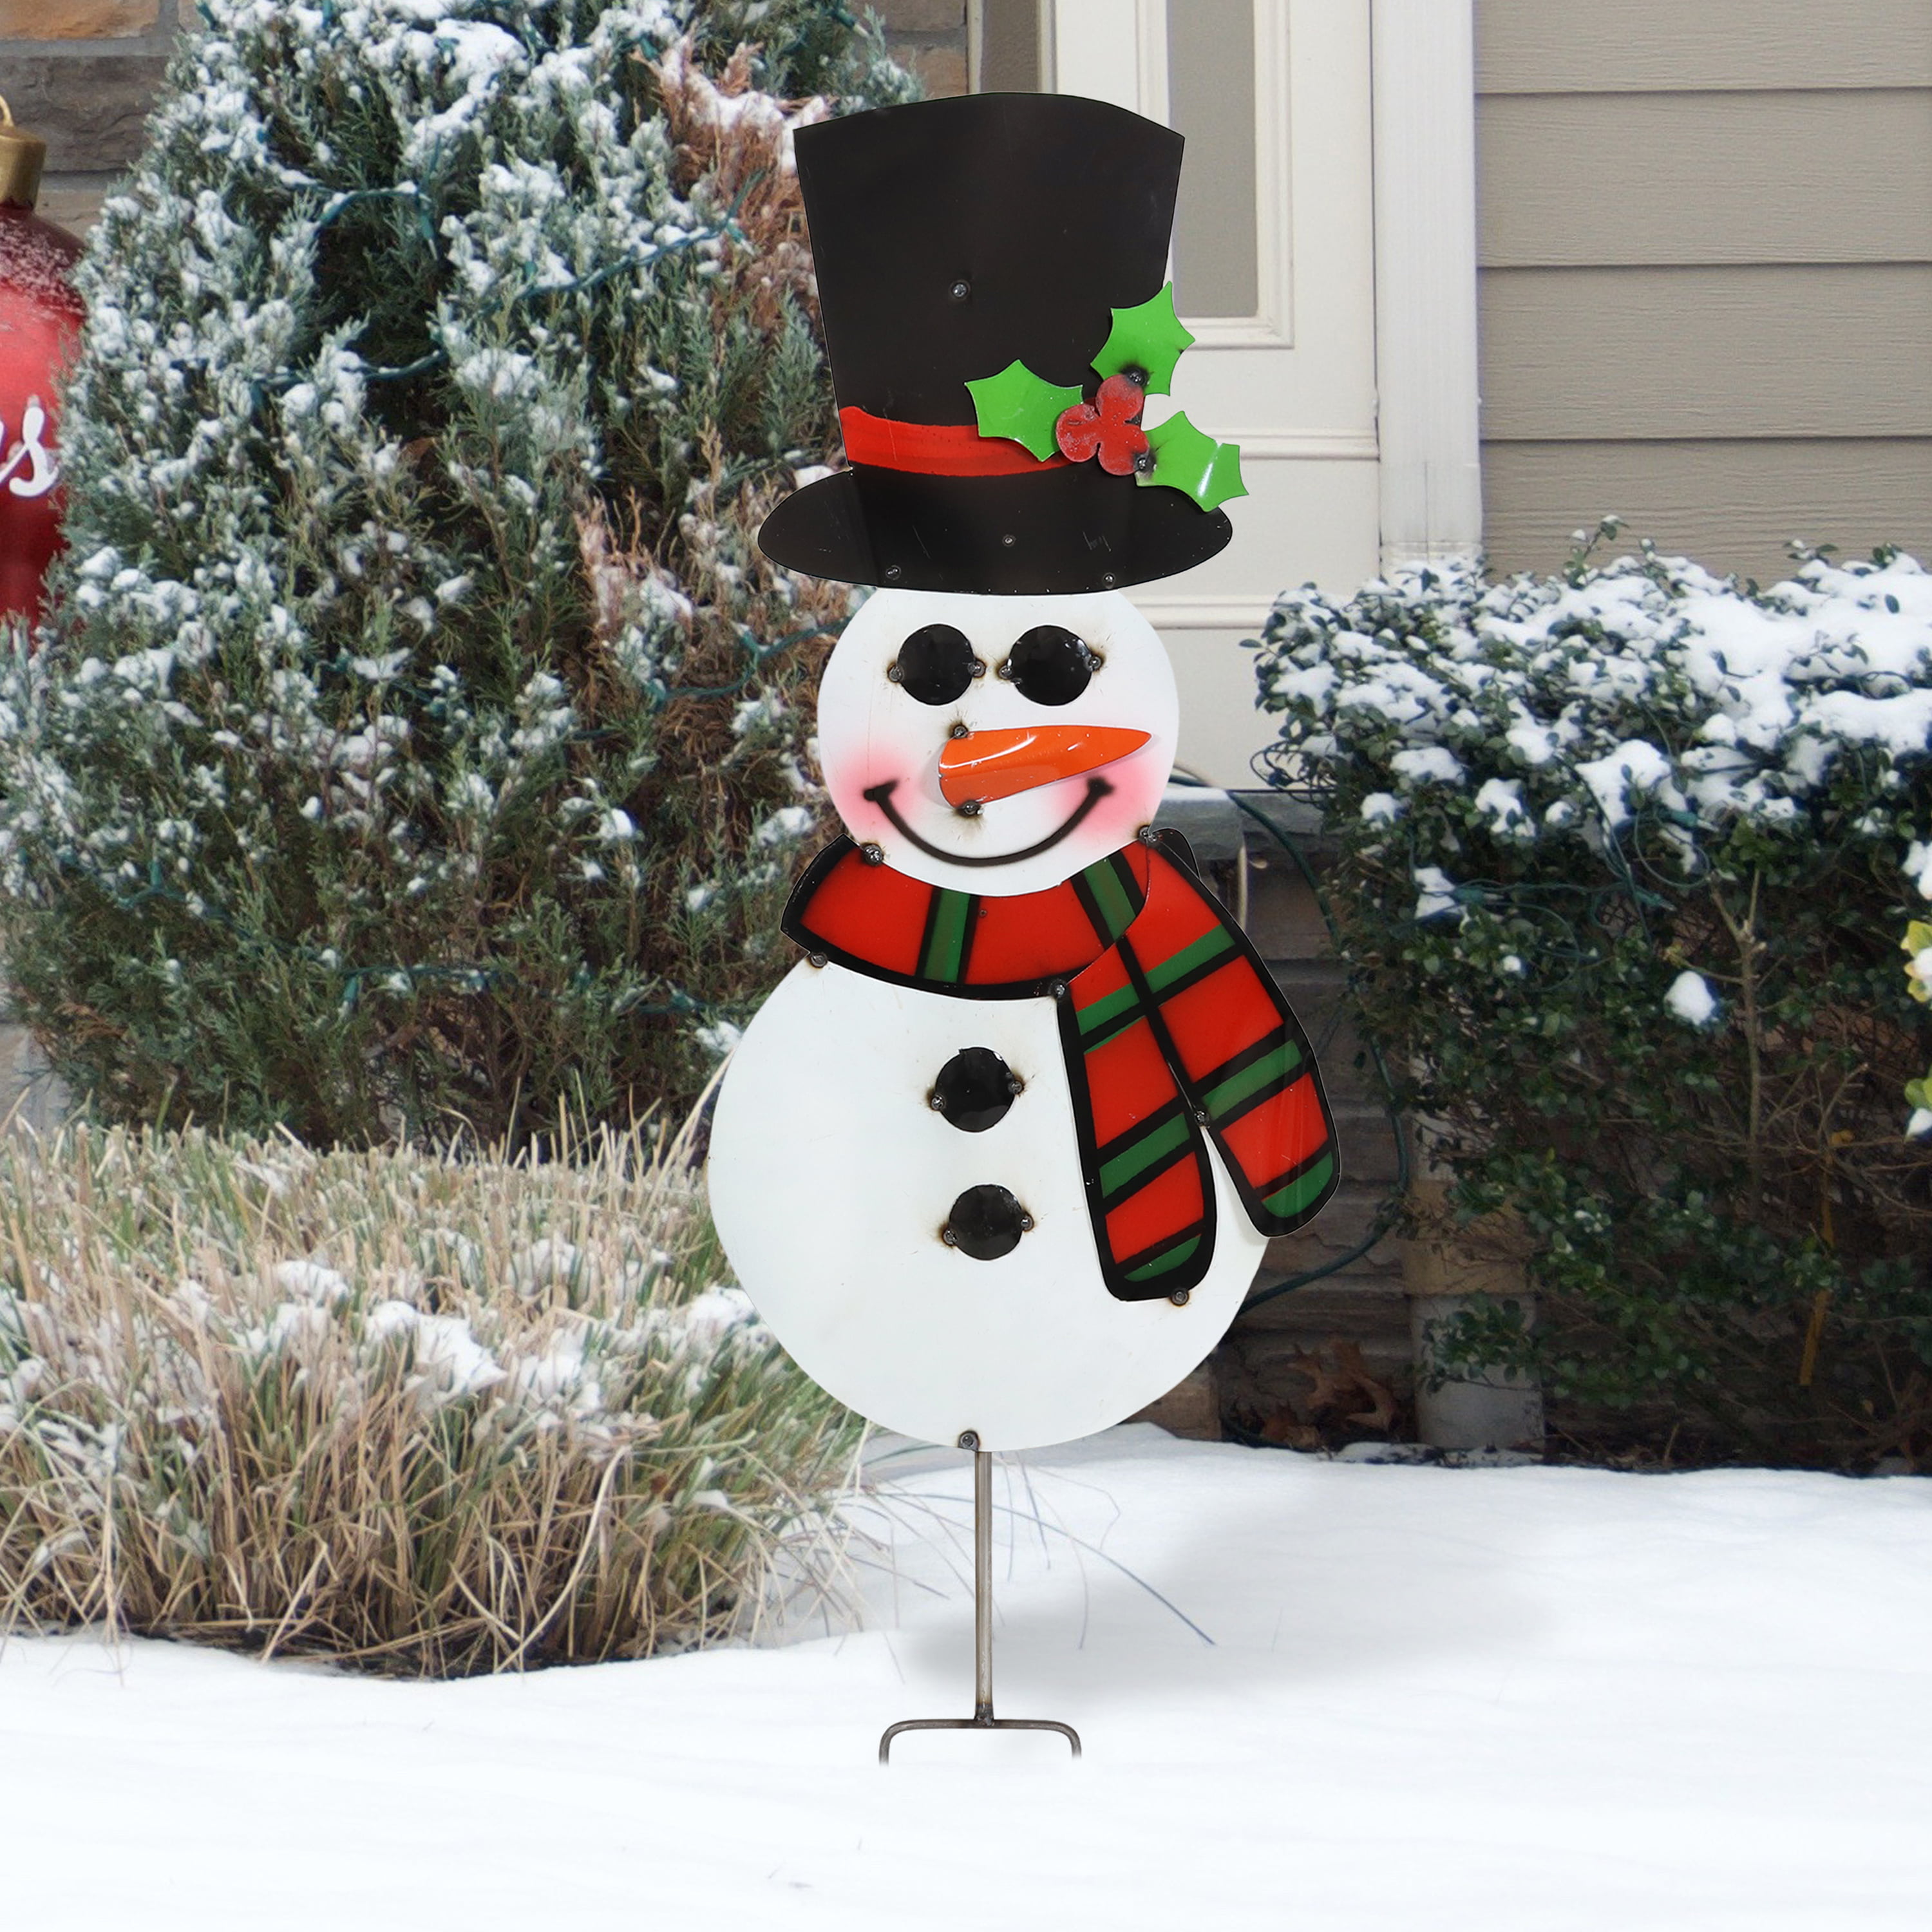 Sunnydaze Holiday Rustic Snowman with Striped Scarf and Top Hat 